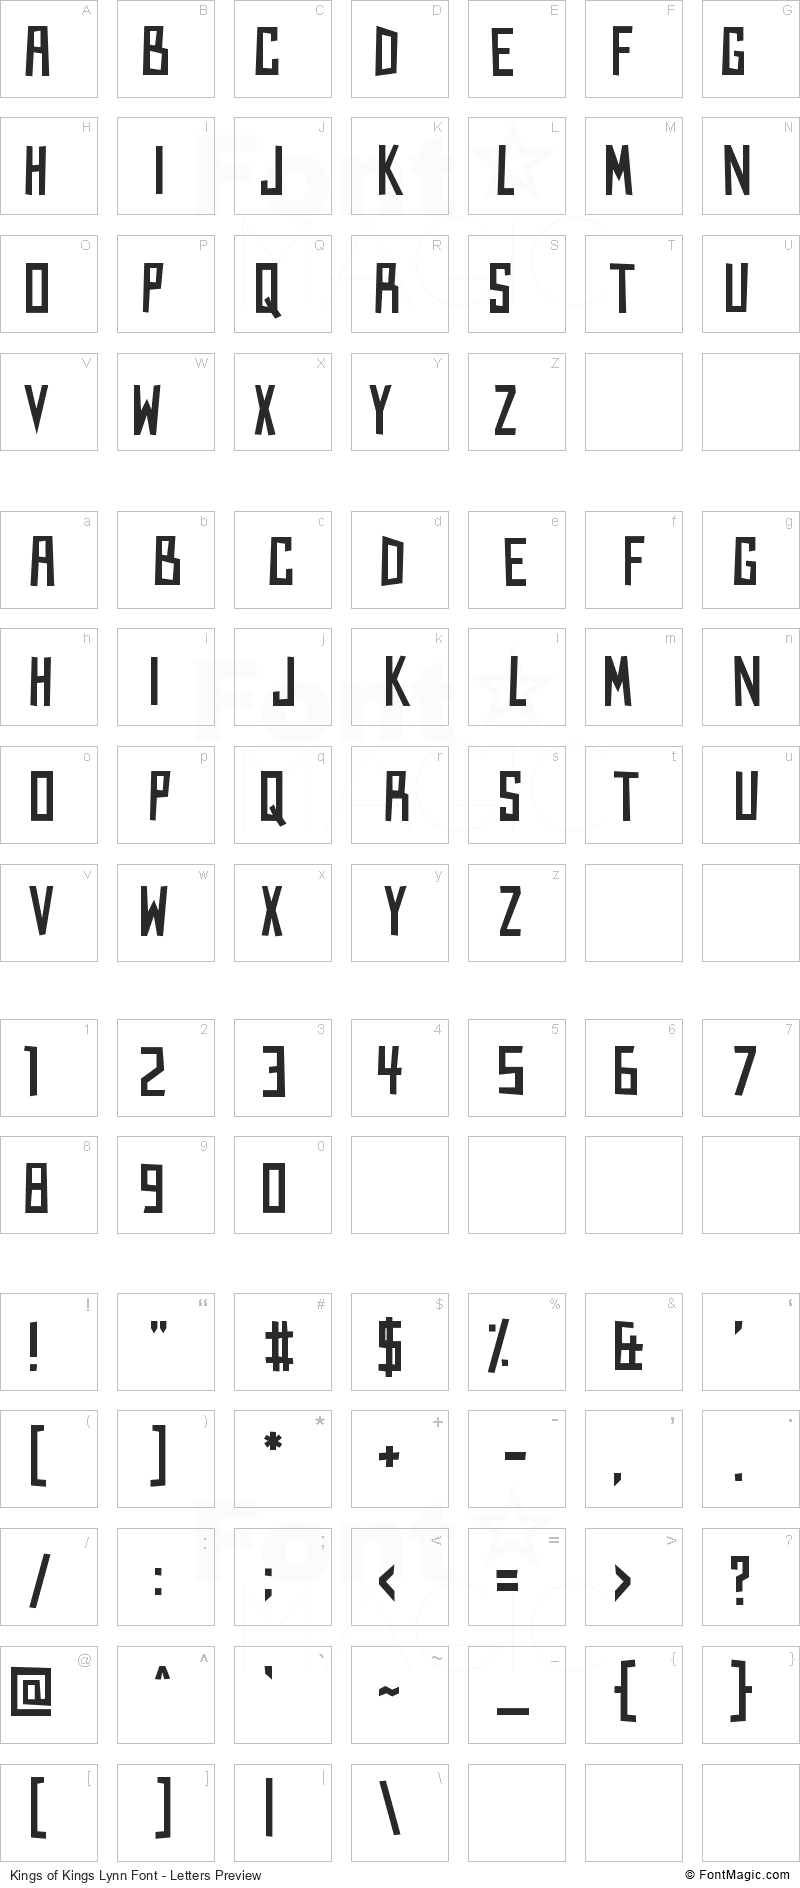 Kings of Kings Lynn Font - All Latters Preview Chart